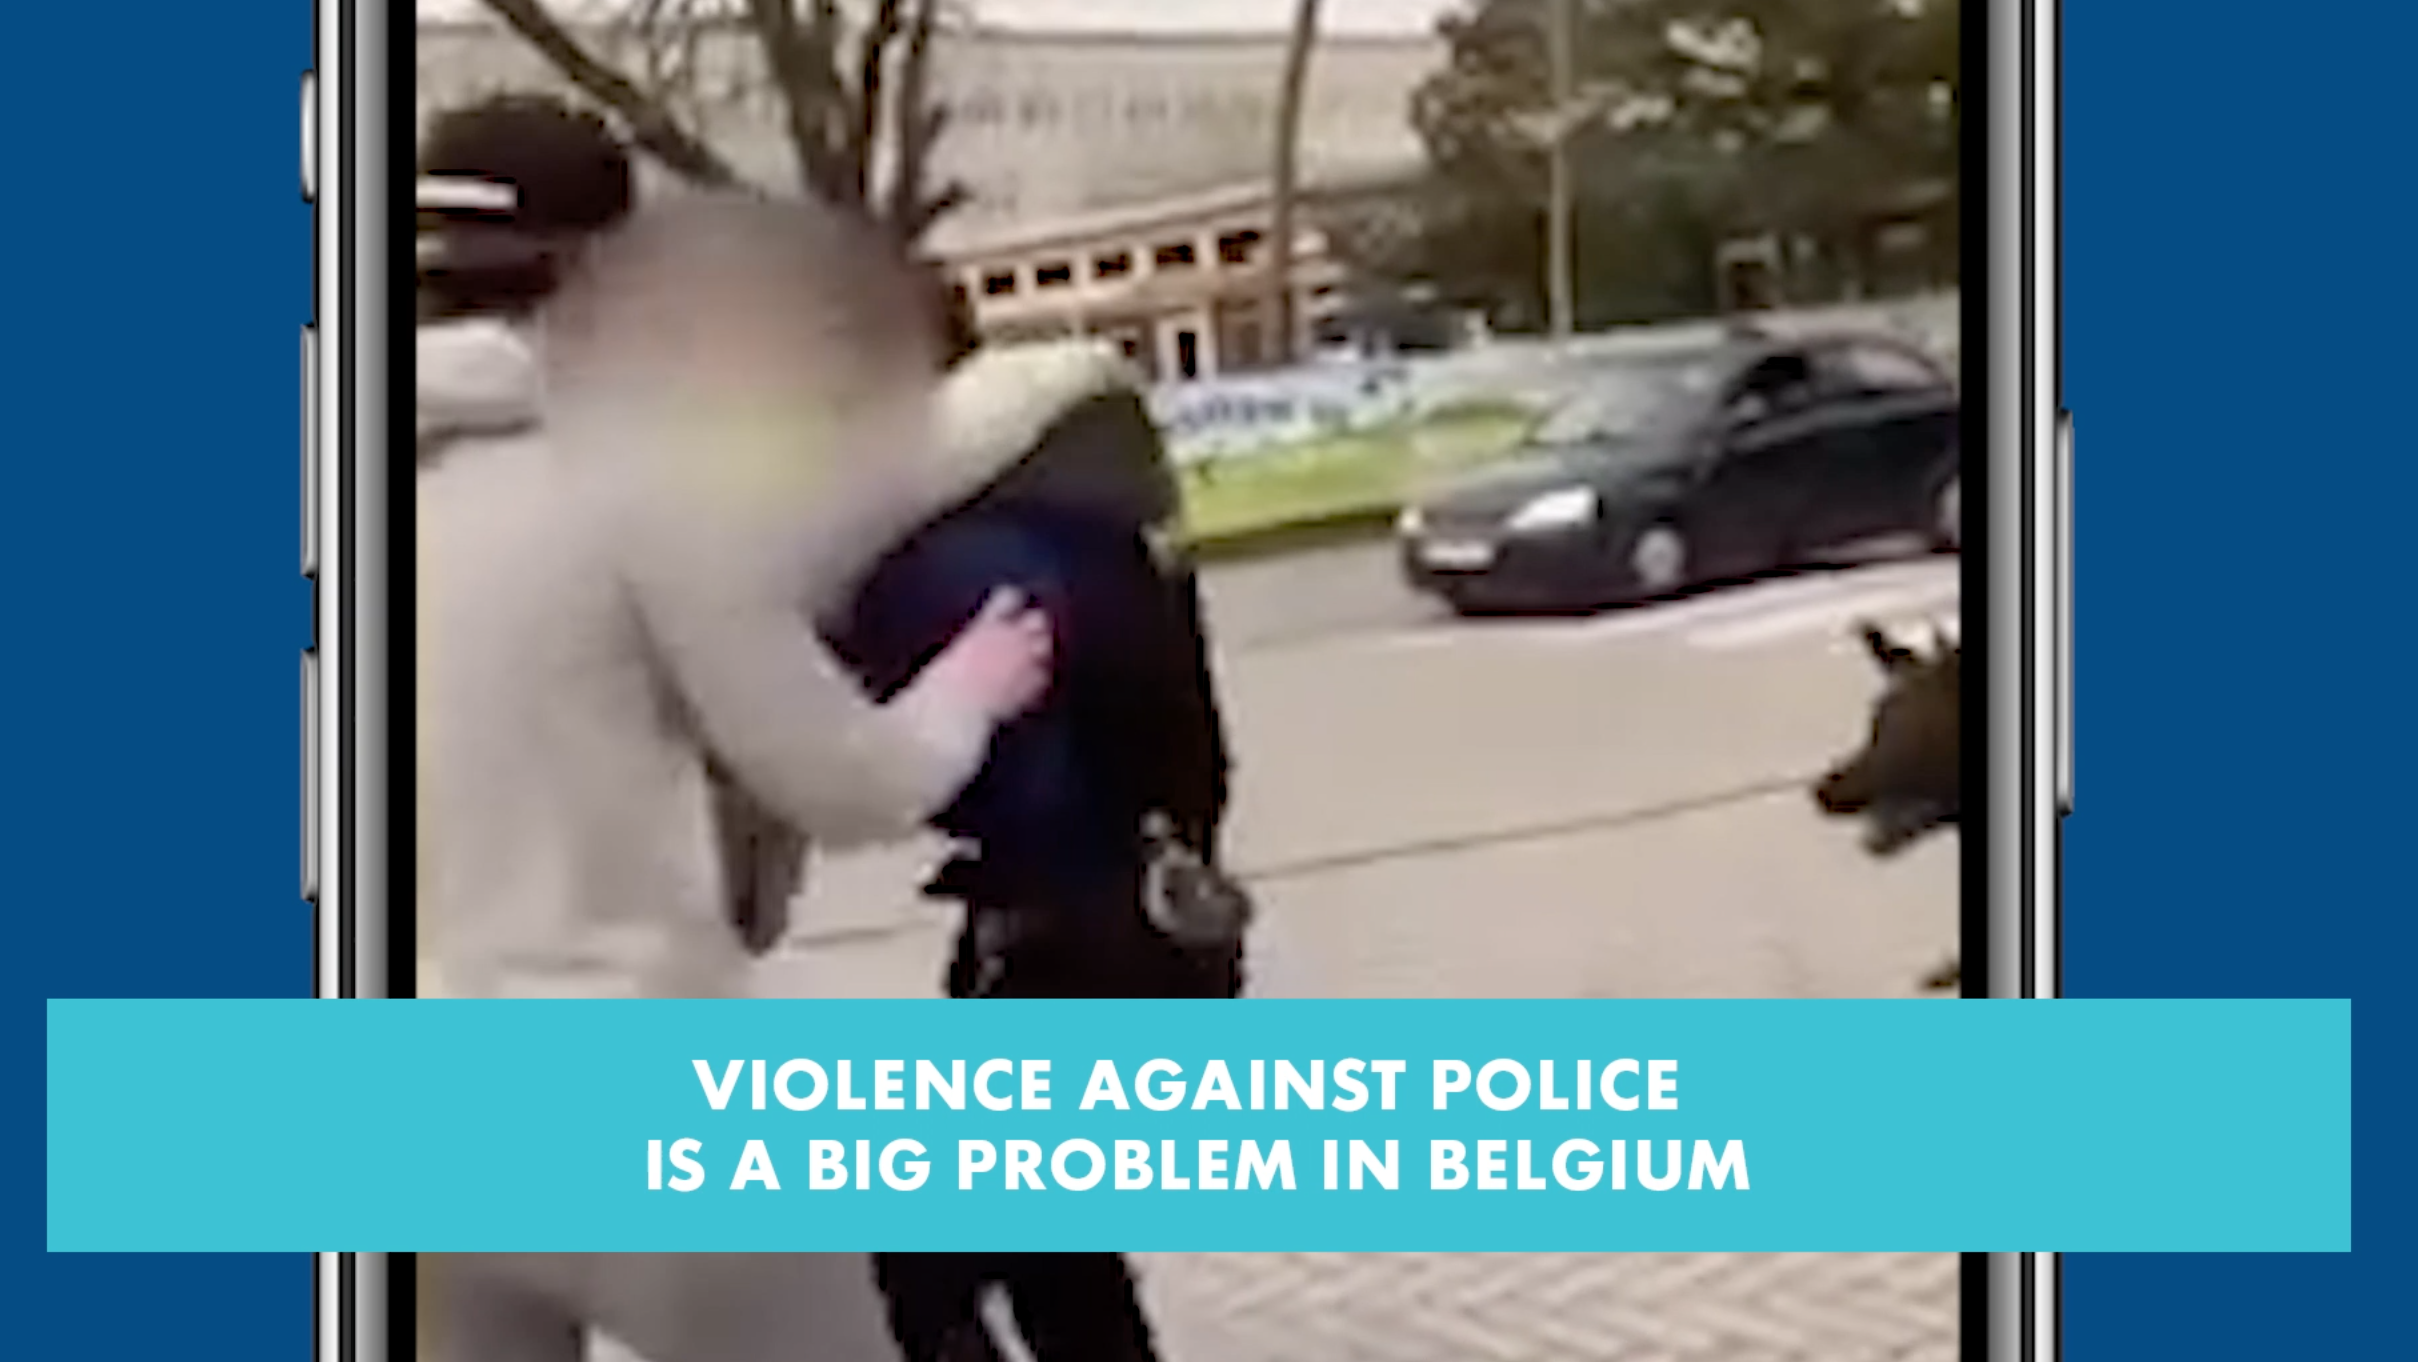 Violence against the police